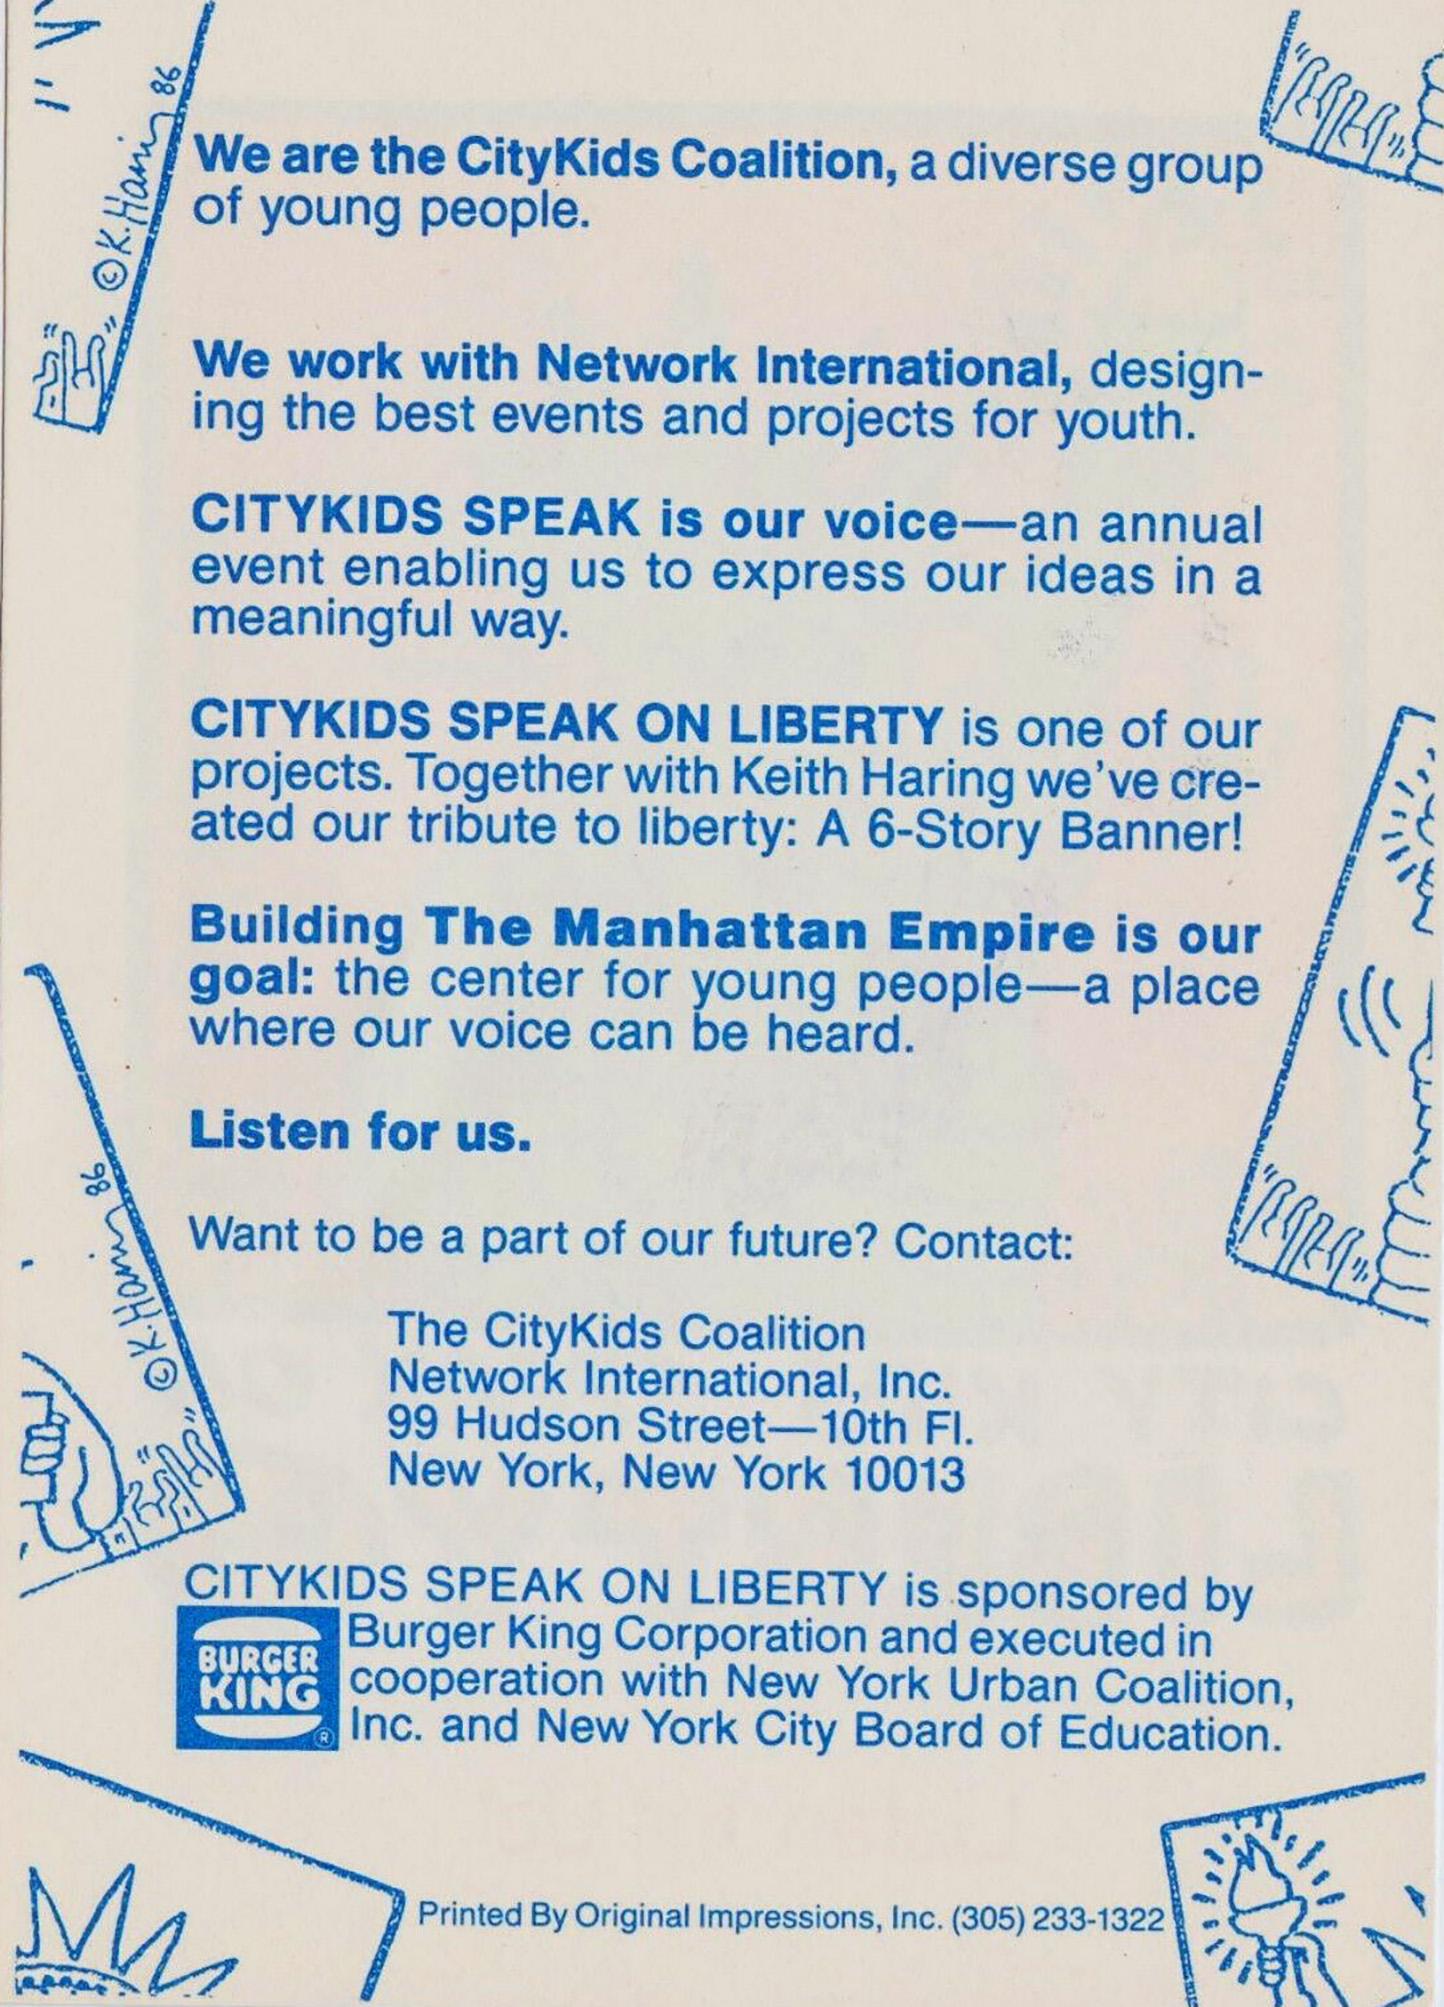 Keith Haring for New York CityKids, 1986.
Rare vintage 1986 sticker illustrated by Keith Haring for the CityKids coalition in New York:
